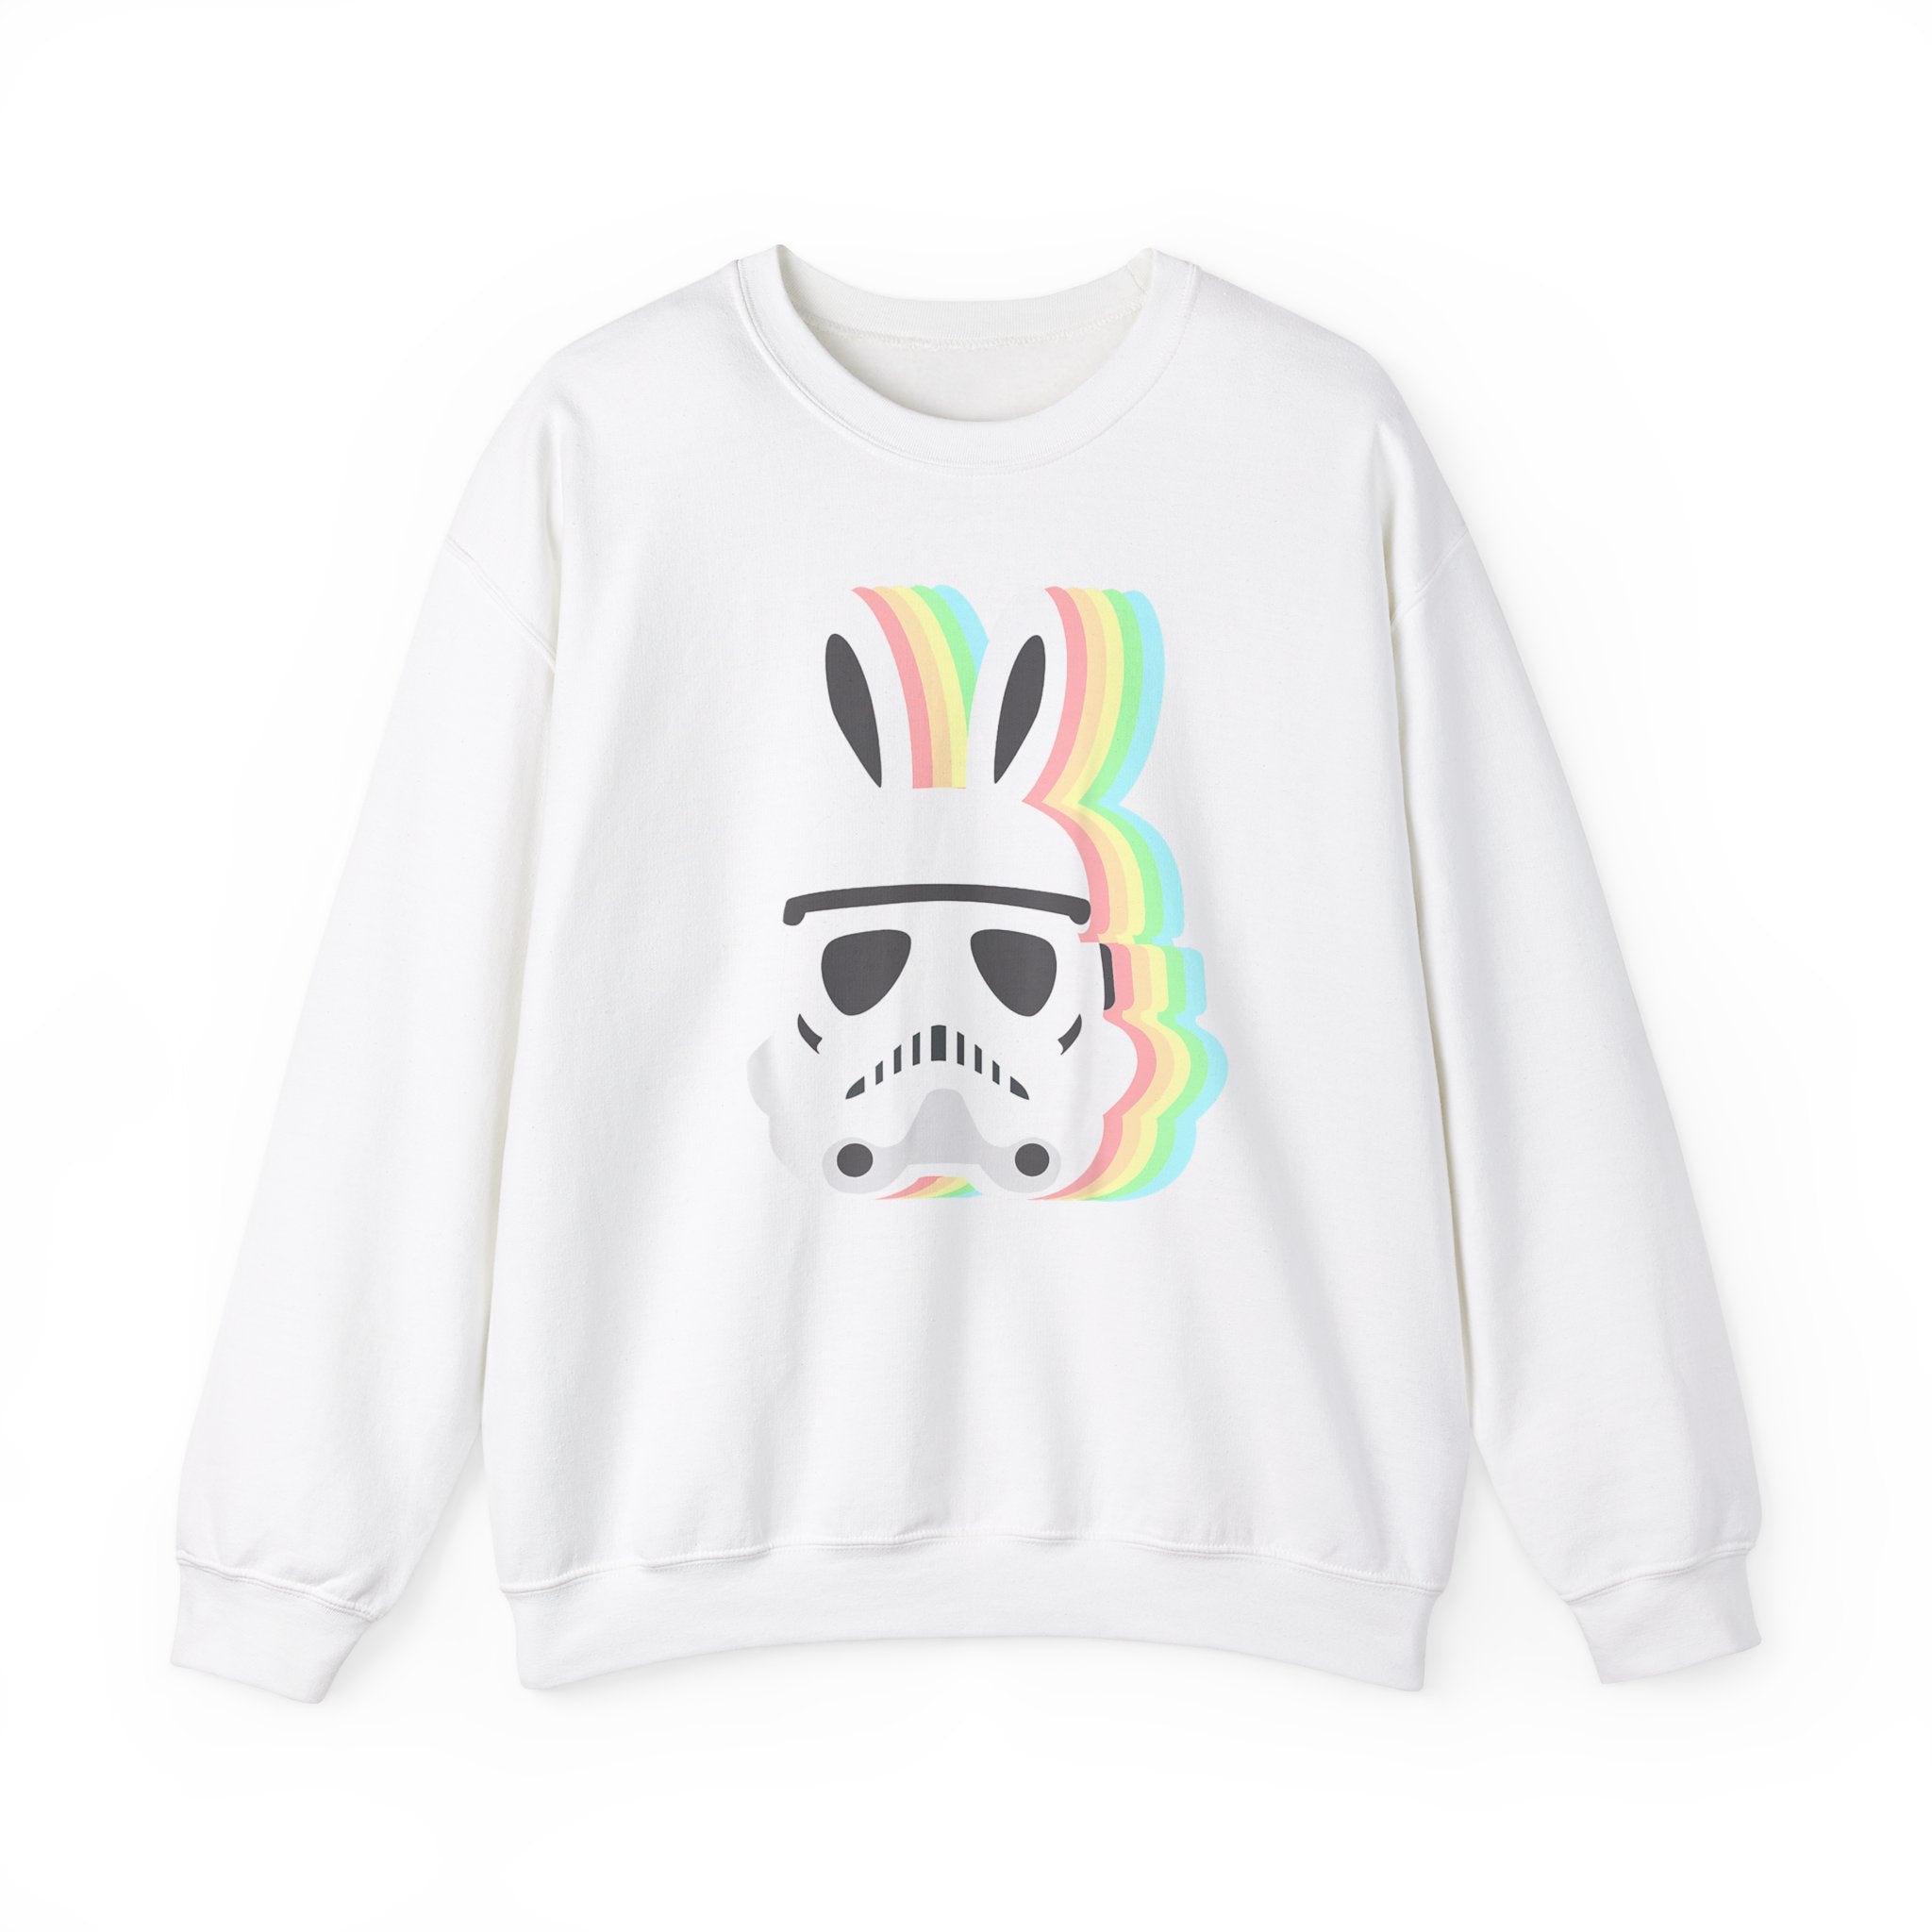 This cozy Star Wars Easter Stormtrooper - Sweatshirt is perfect for the colder months, featuring a graphic of an Easter Stormtrooper helmet with bunny ears and a rainbow outline.